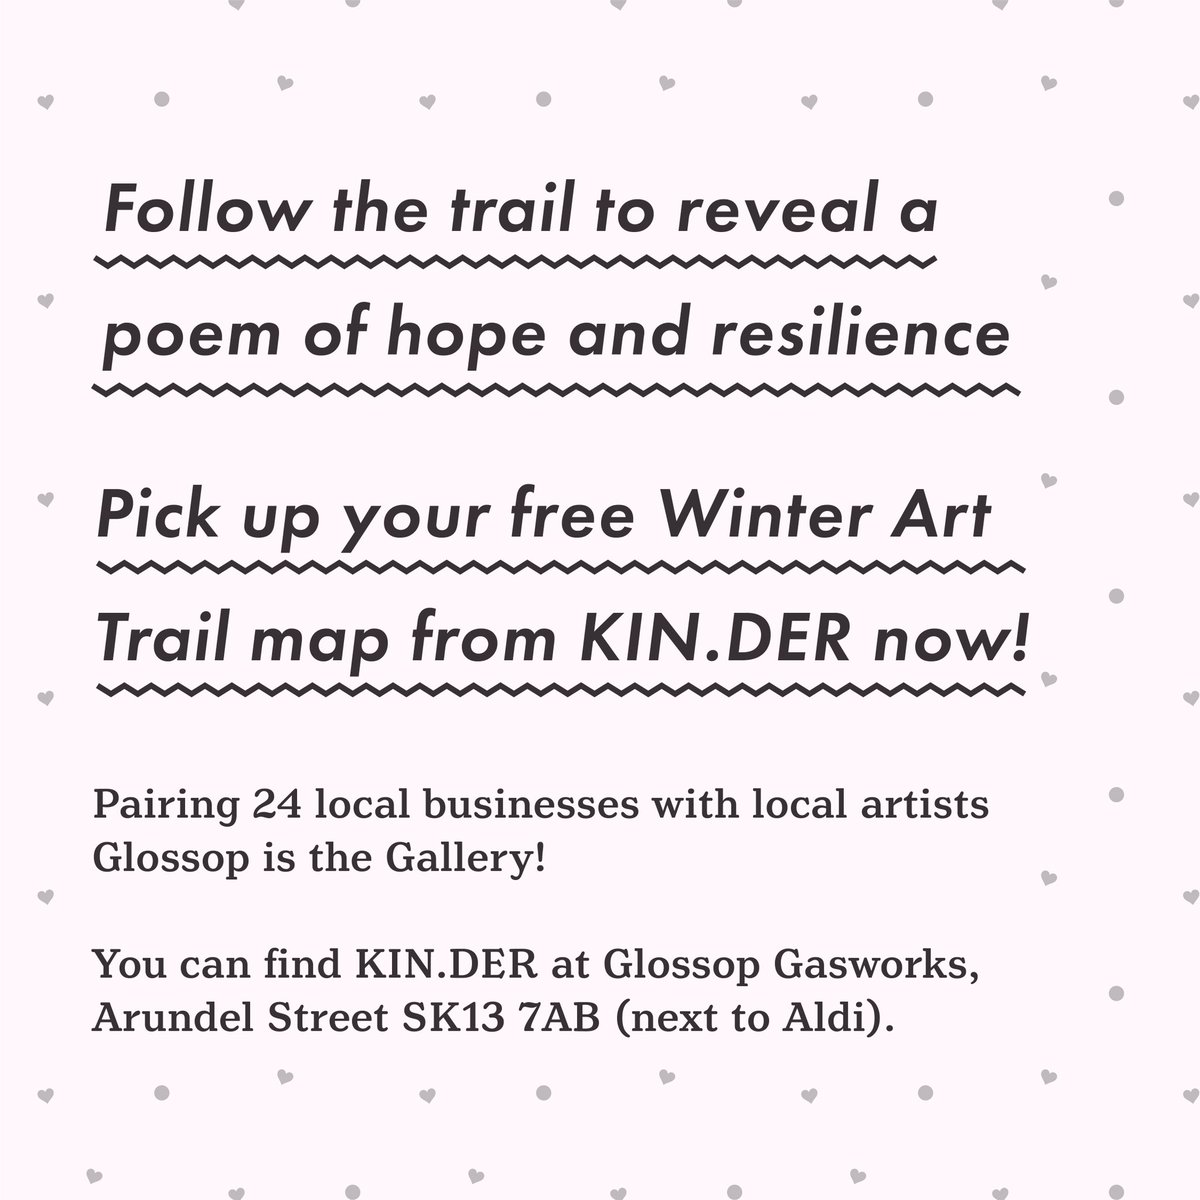 Come join the Love Glossop Winter Art Trail this Saturday to reveal the Christmas poem and see amazing artwork from Glossop’s amazing local creative peeps. #loveglossopwinterarttrail 
#christmas #christmaswindows #glossop #loveglossop #shoplocal #localartist  @glossopcreates